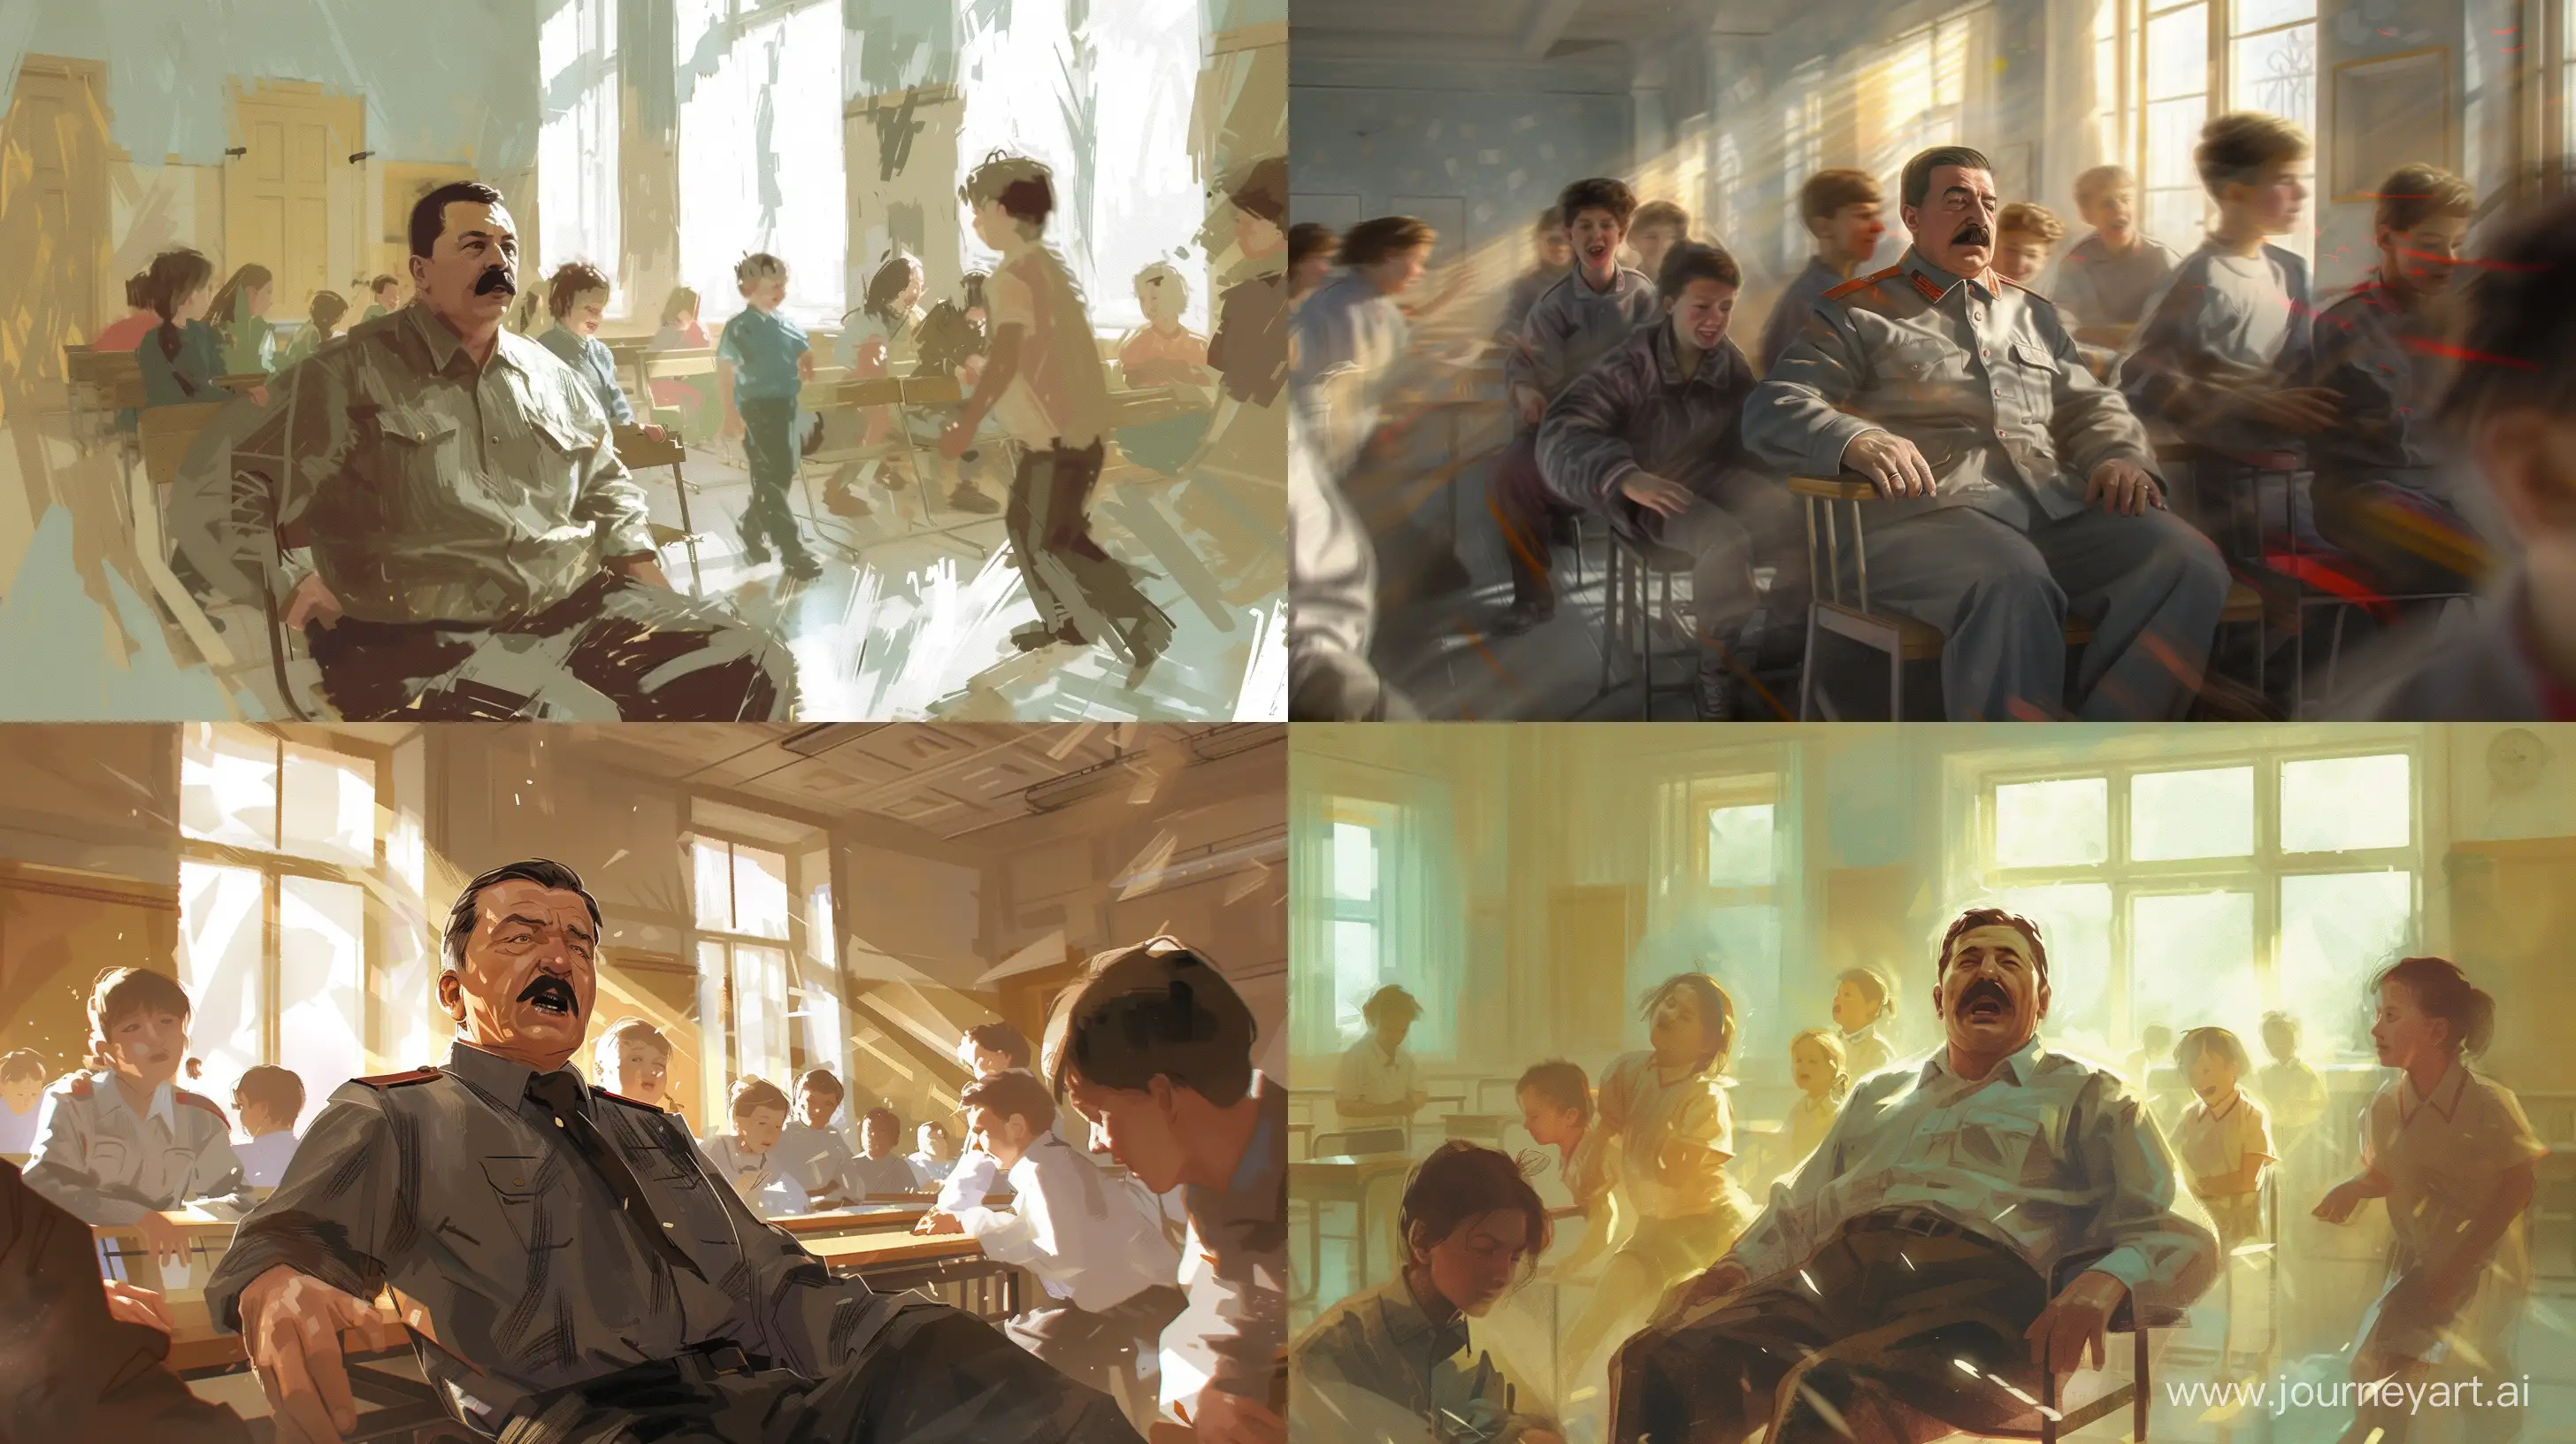 Stalin sits during recess in a Polish school, surrounded by the noise and laughter of students. The classroom is filled with bright morning light, which creates playful shadows on the walls. The image should be made in the style of impressionism, with soft, blurred contours, to convey an atmosphere of freedom and joy. Stalin should look a little surprised and perplexed, and the students should be shown moving, showing their playfulness and energy. The mood of the image should be light and cheerful, reflecting a relaxed moment of recess at school --ar 16:9  --q 2